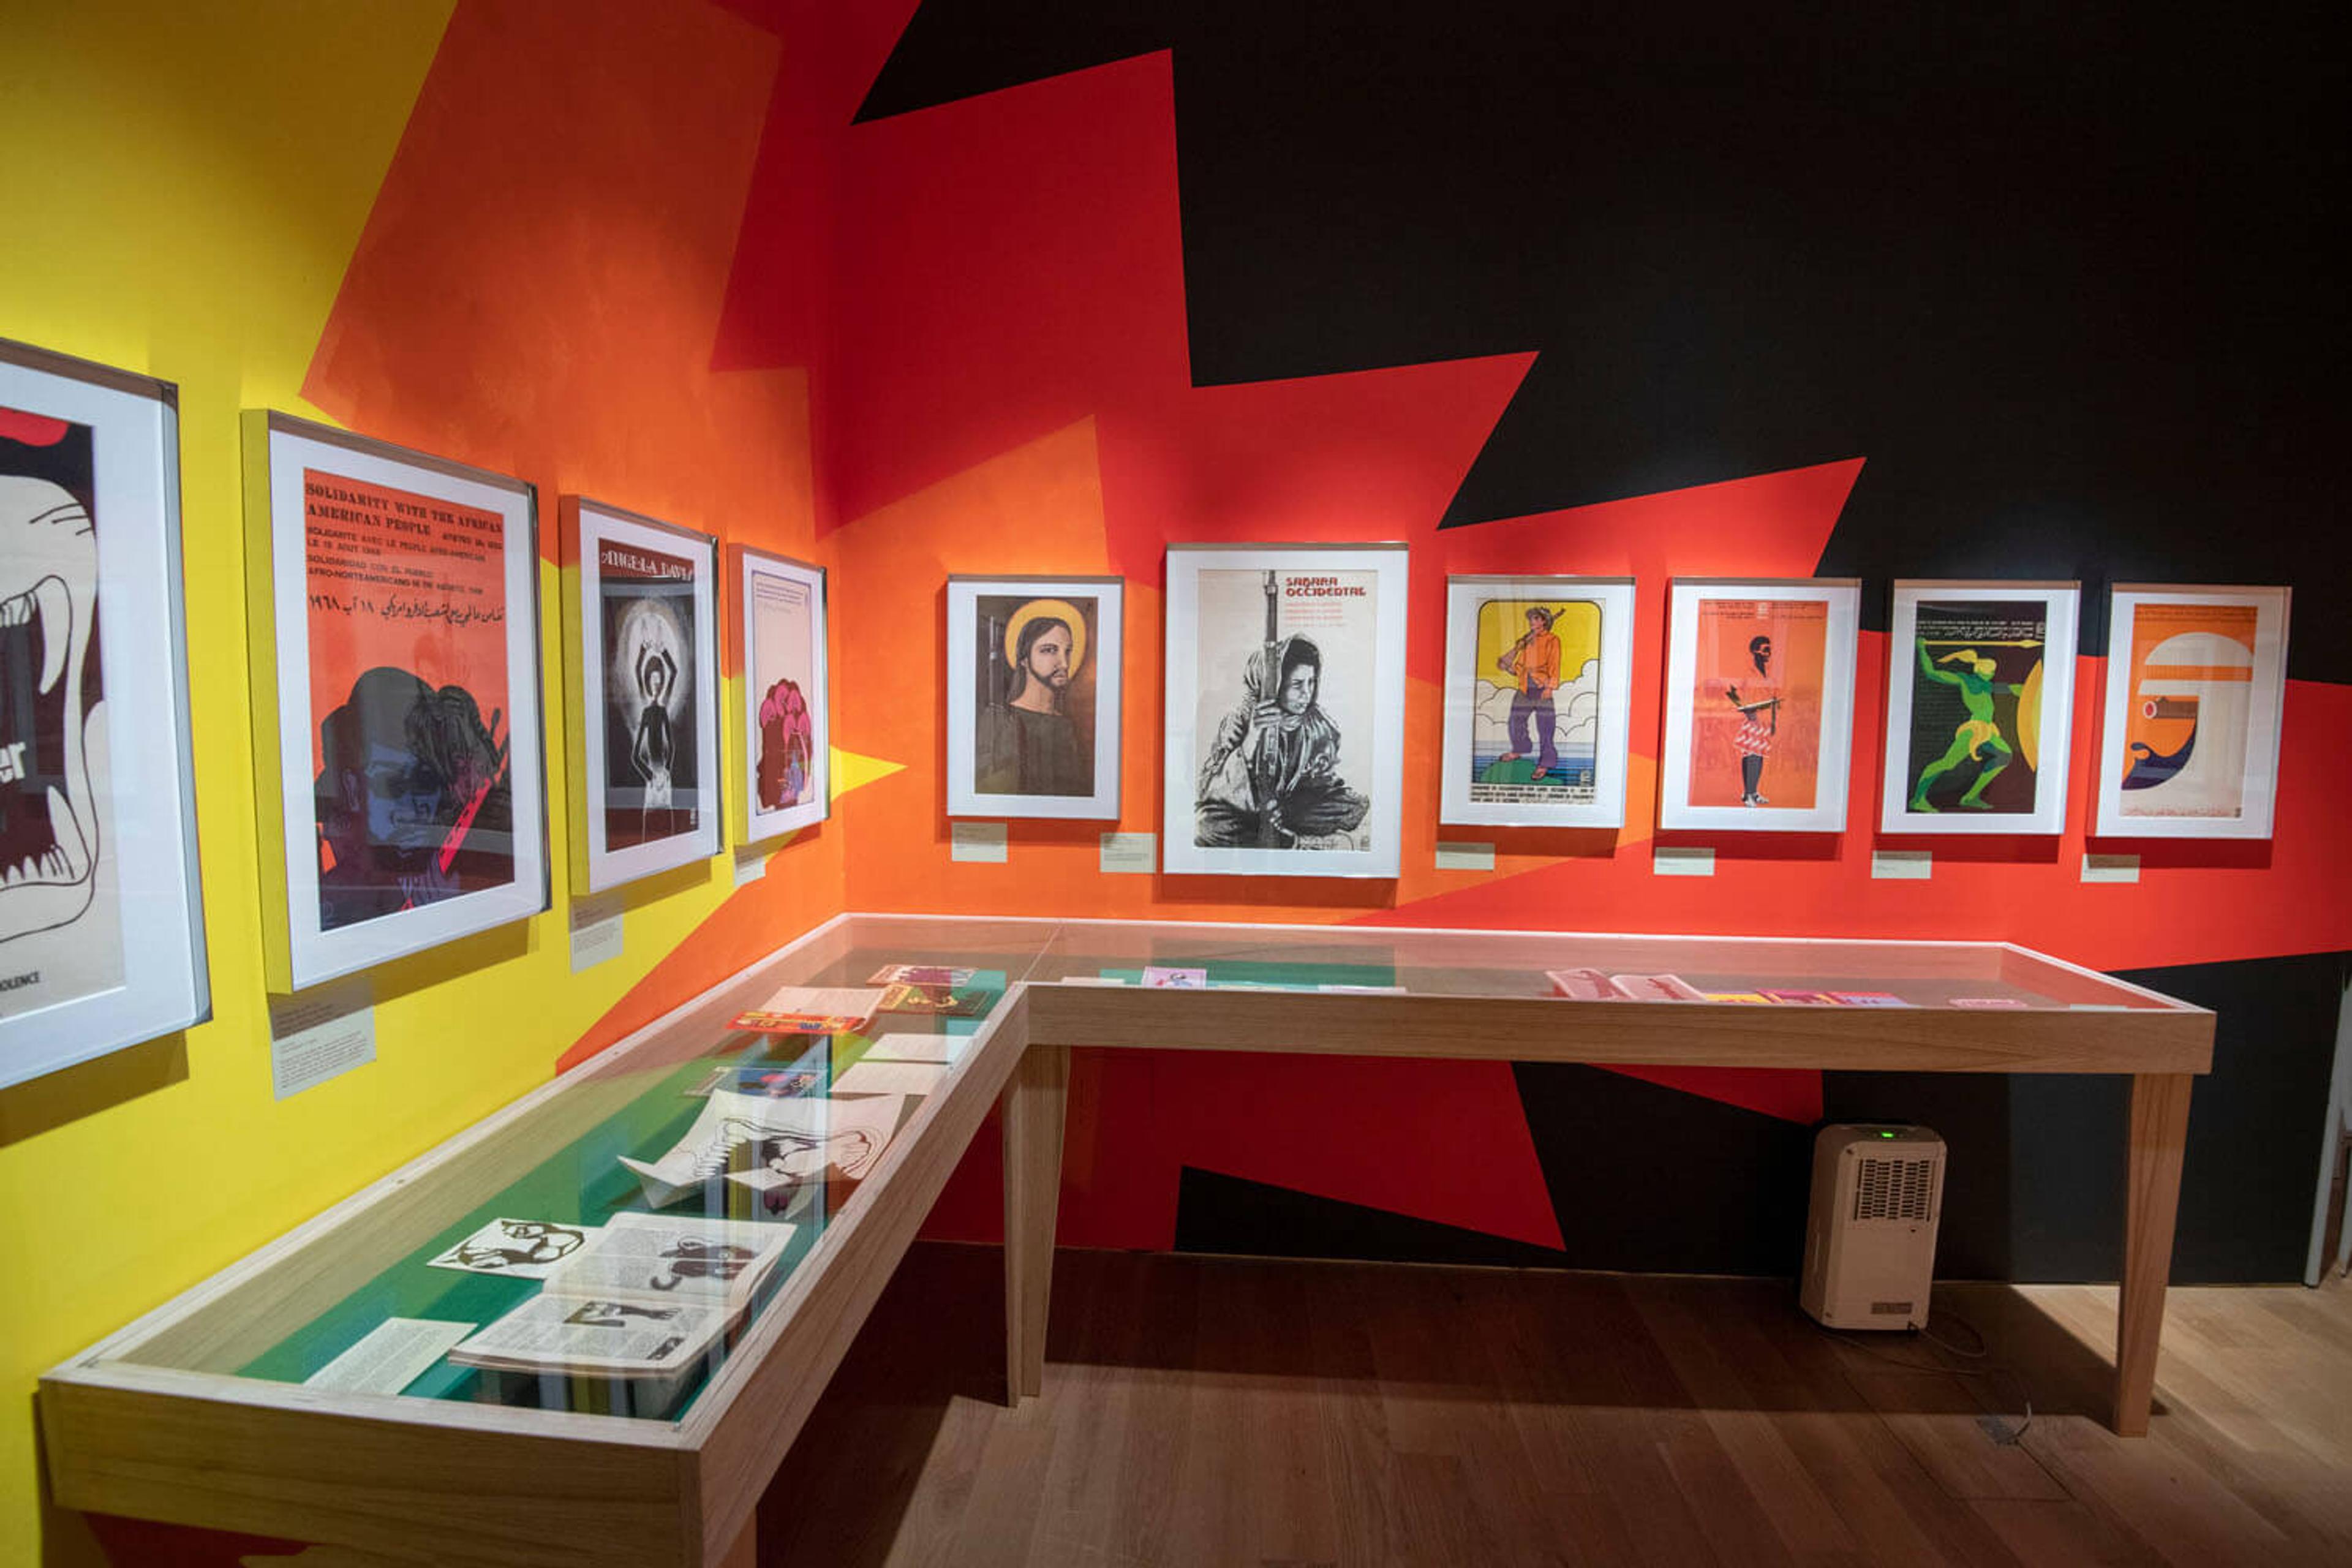 Display cases and framed posters at the exhibition